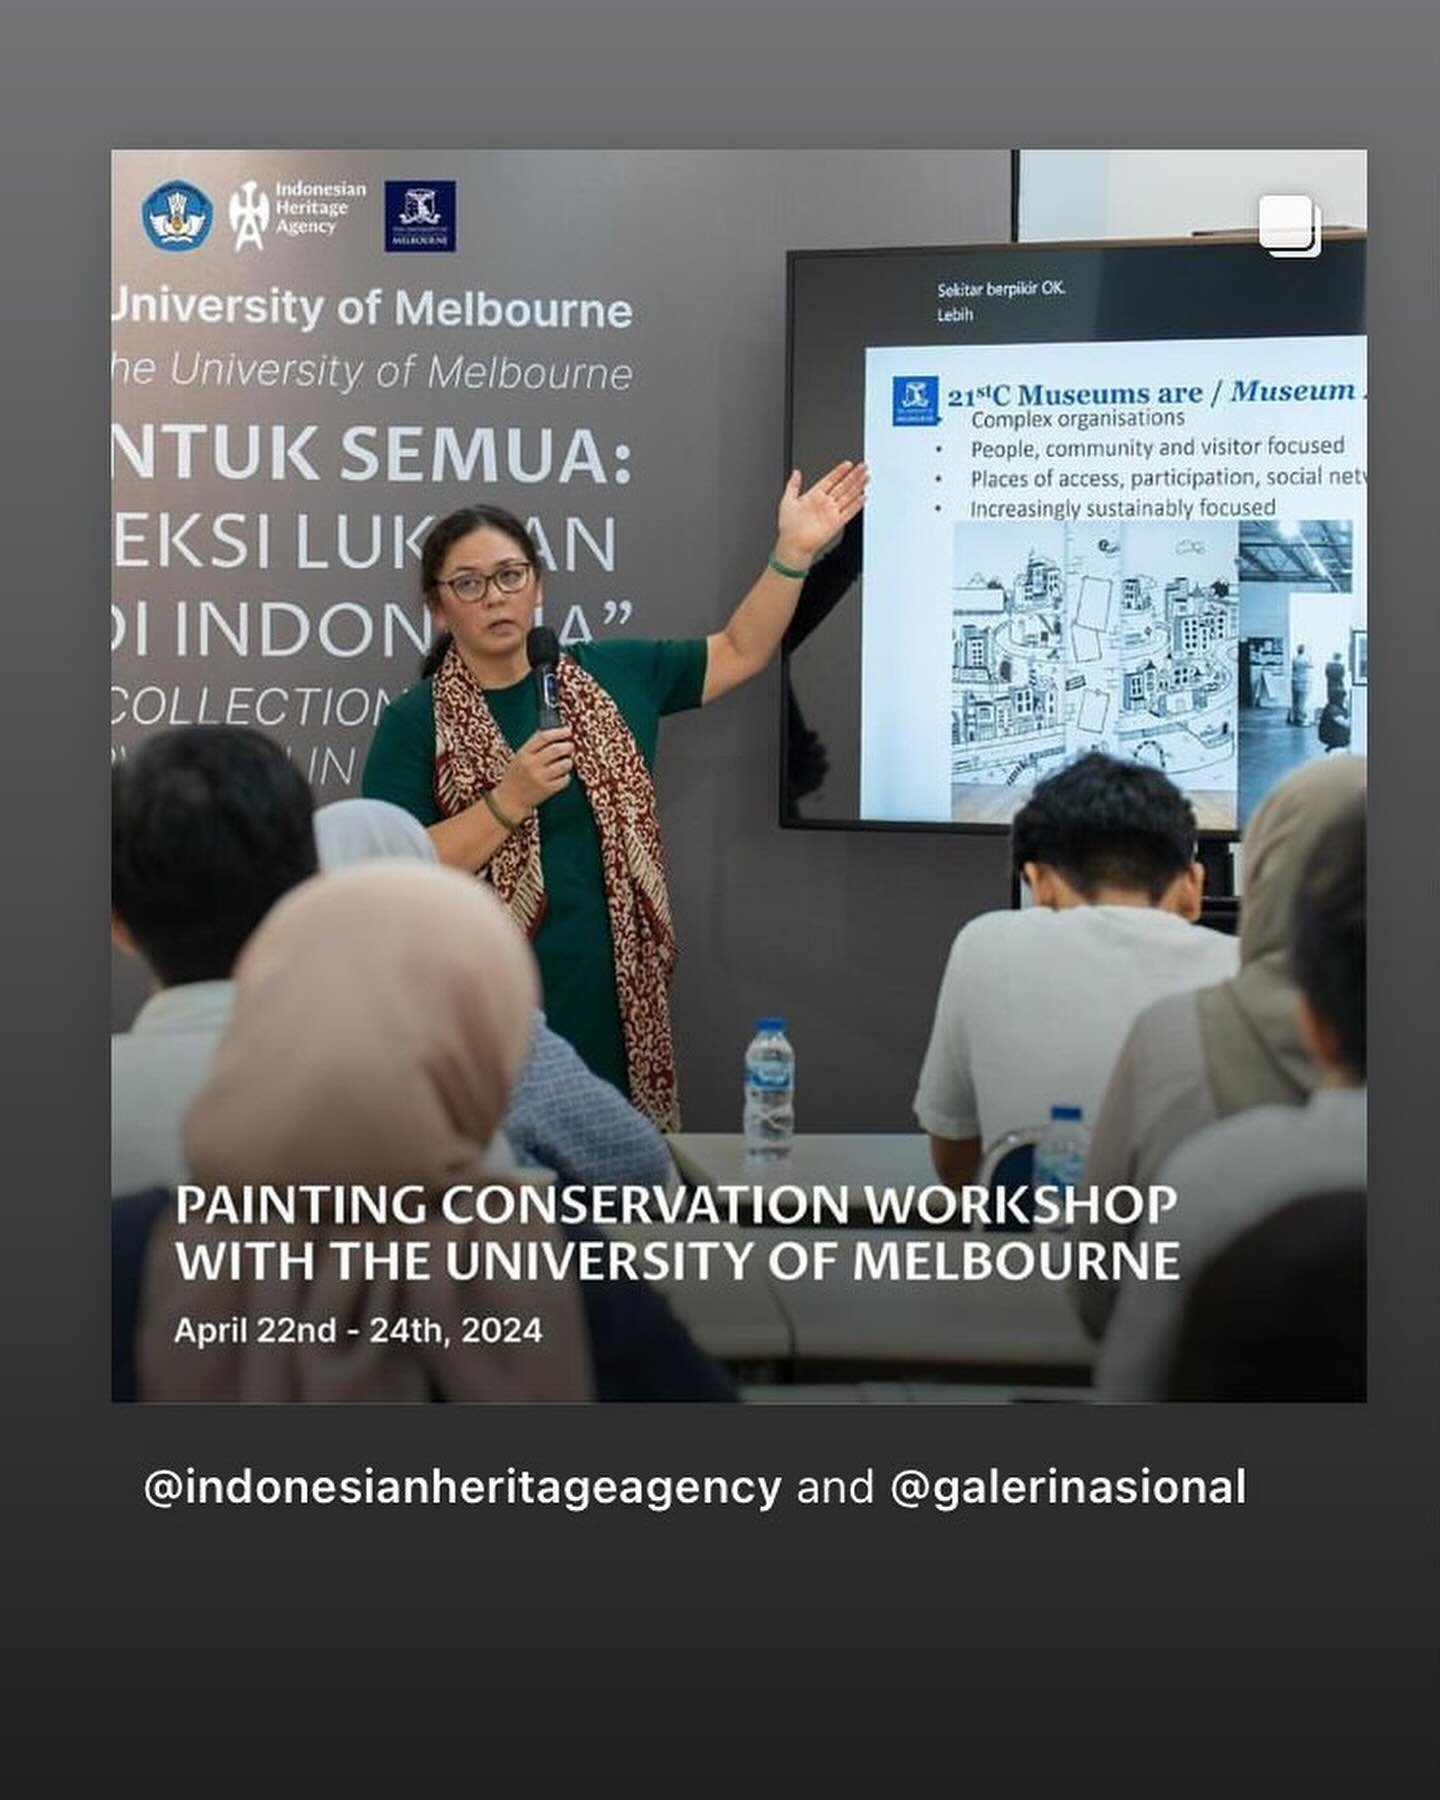 APTCCARN, The University of Melbourne and the Indonesian Heritage Agency recently held a painting conservation workshop at the National Gallery of Indonesia, aiming to learn how local expertise and knowledge can be adapted for collection care and con